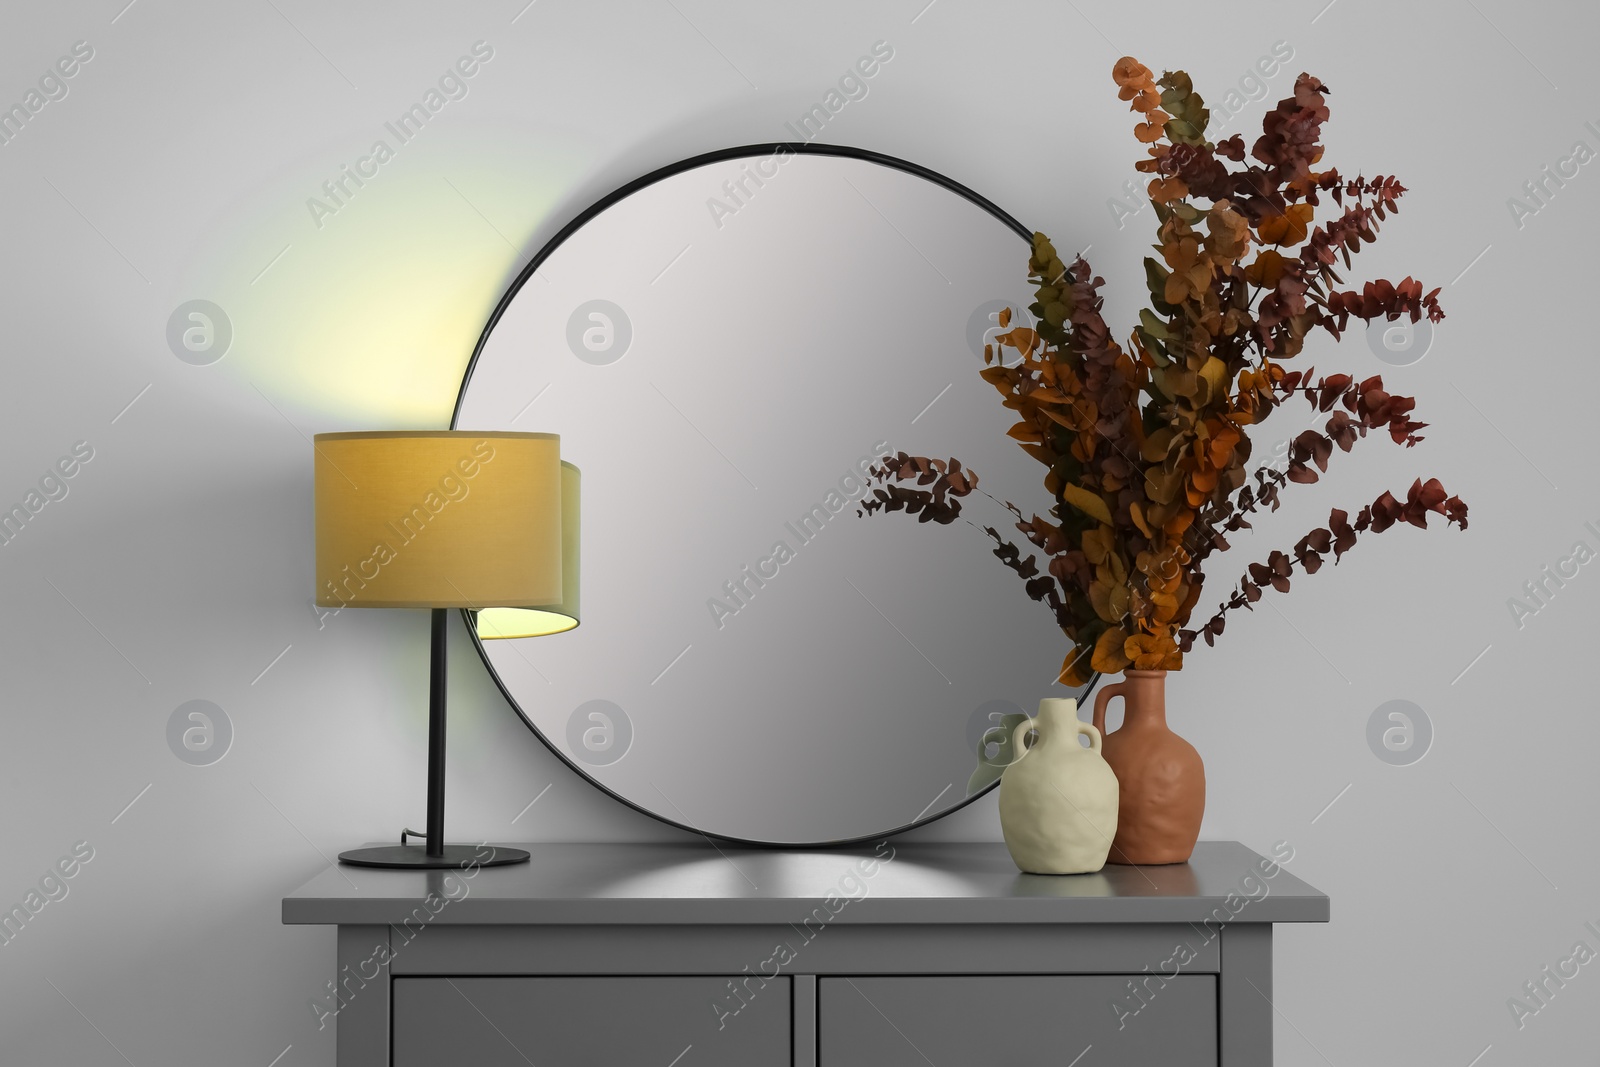 Photo of Stylish round mirror, vases, dried eucalyptus branches and table lamp on chest of drawers near white wall indoors. Interior design